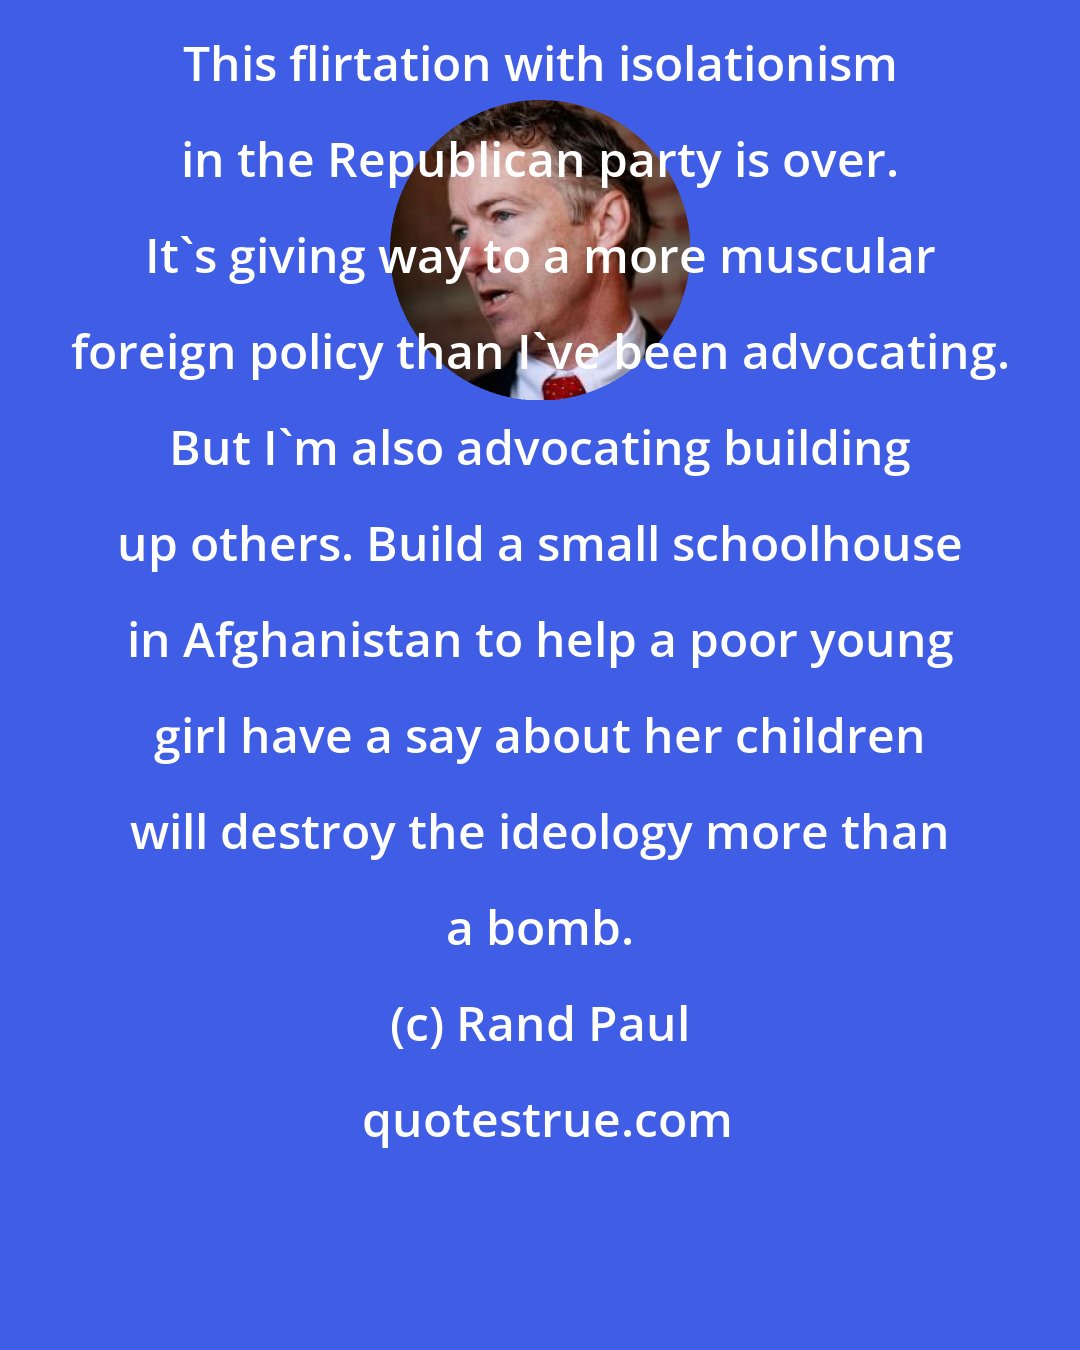 Rand Paul: This flirtation with isolationism in the Republican party is over. It's giving way to a more muscular foreign policy than I've been advocating. But I'm also advocating building up others. Build a small schoolhouse in Afghanistan to help a poor young girl have a say about her children will destroy the ideology more than a bomb.